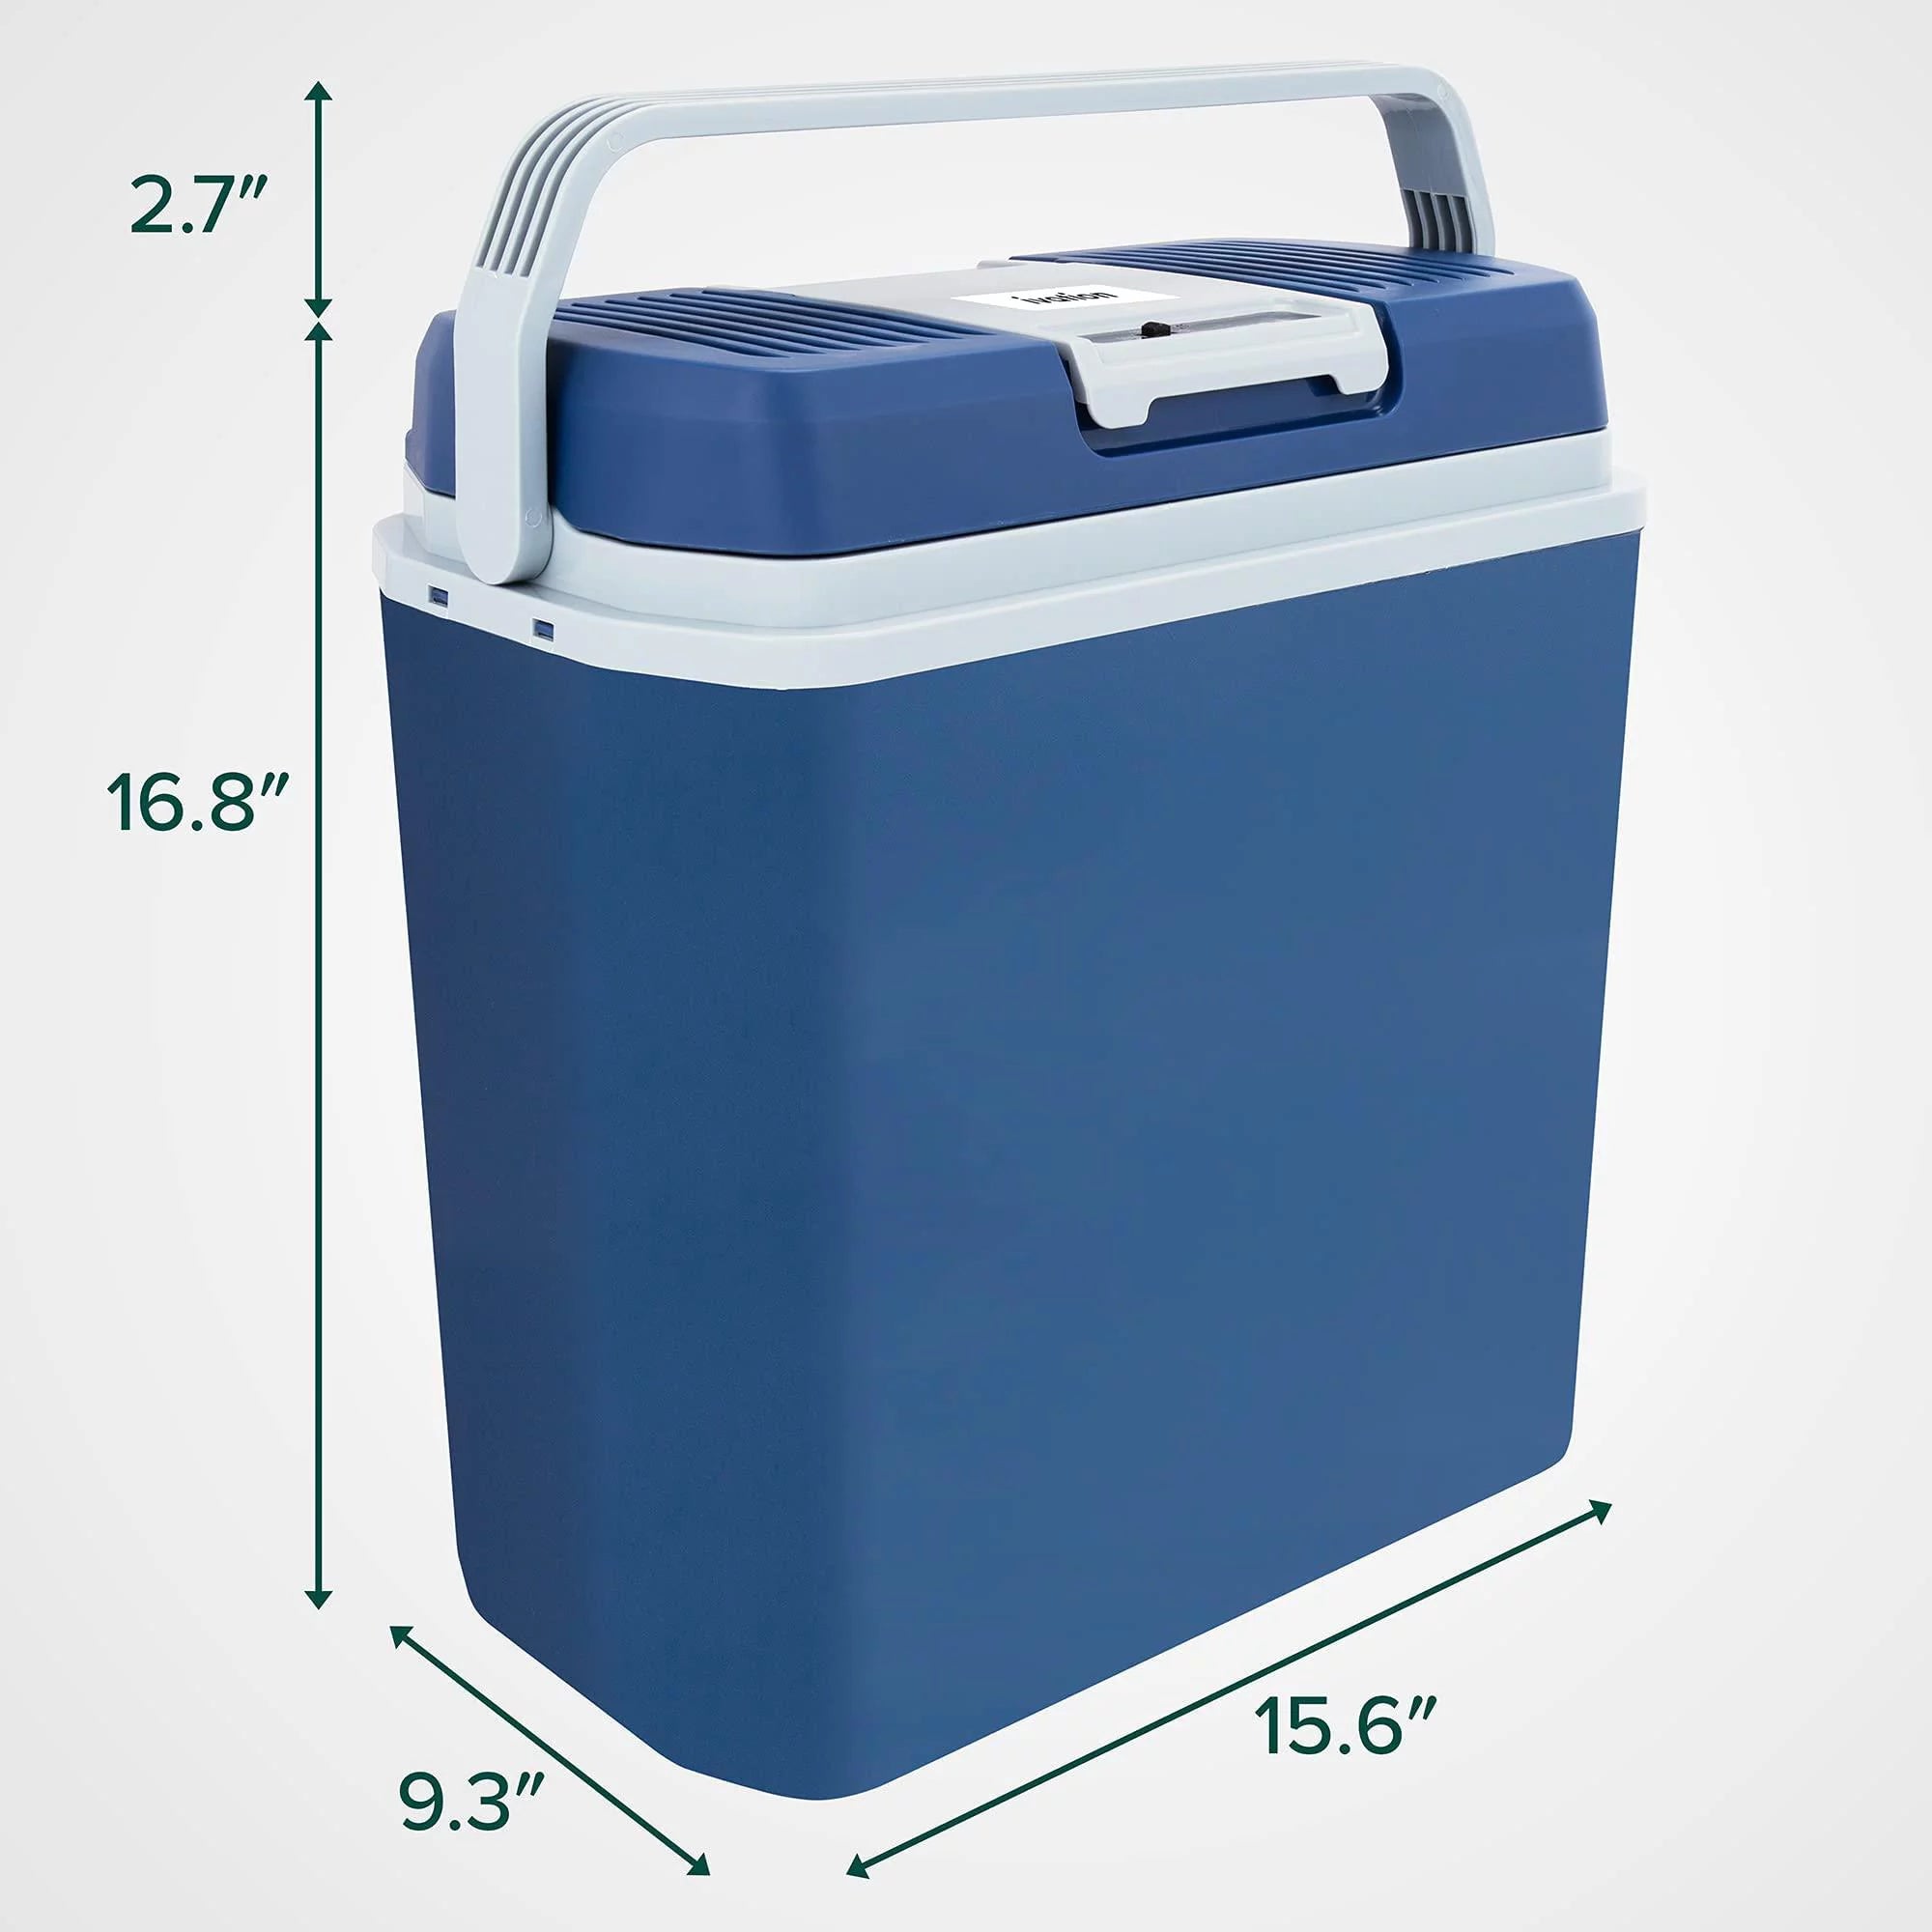 Electric Cooler & Warmer, 24 L Portable Thermoelectric 12 Volt Cooler with Handle (Blue)